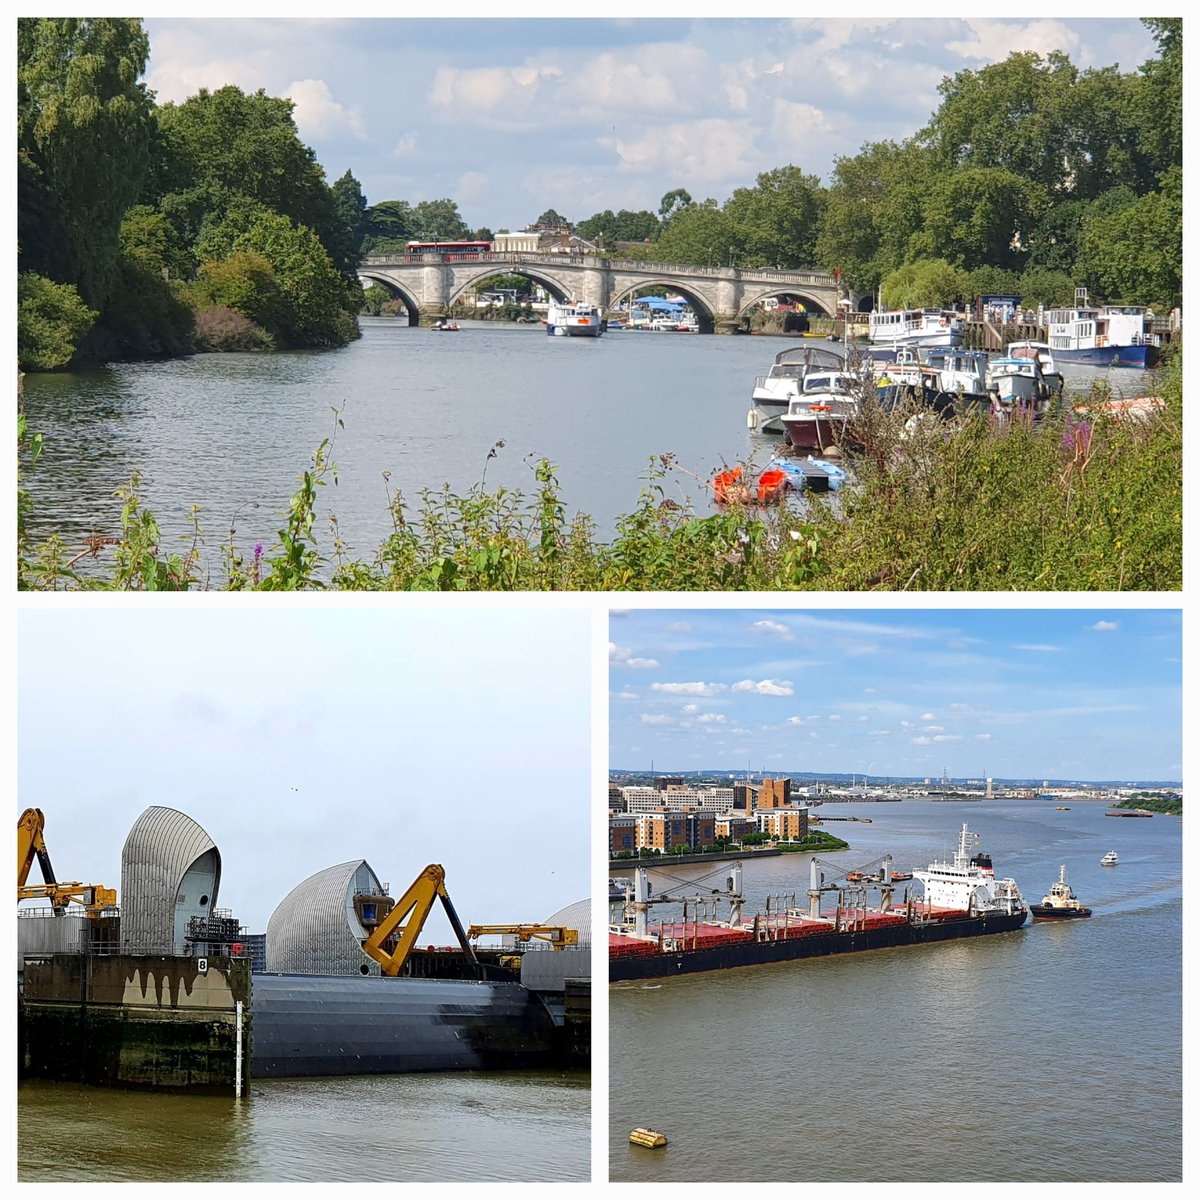 Contrasting #Thames river views on the #CapitalRing. Pretty #Richmond with leisure boats & the working #Woolwich end with #ThamesBarrier & big ships full of sugar!